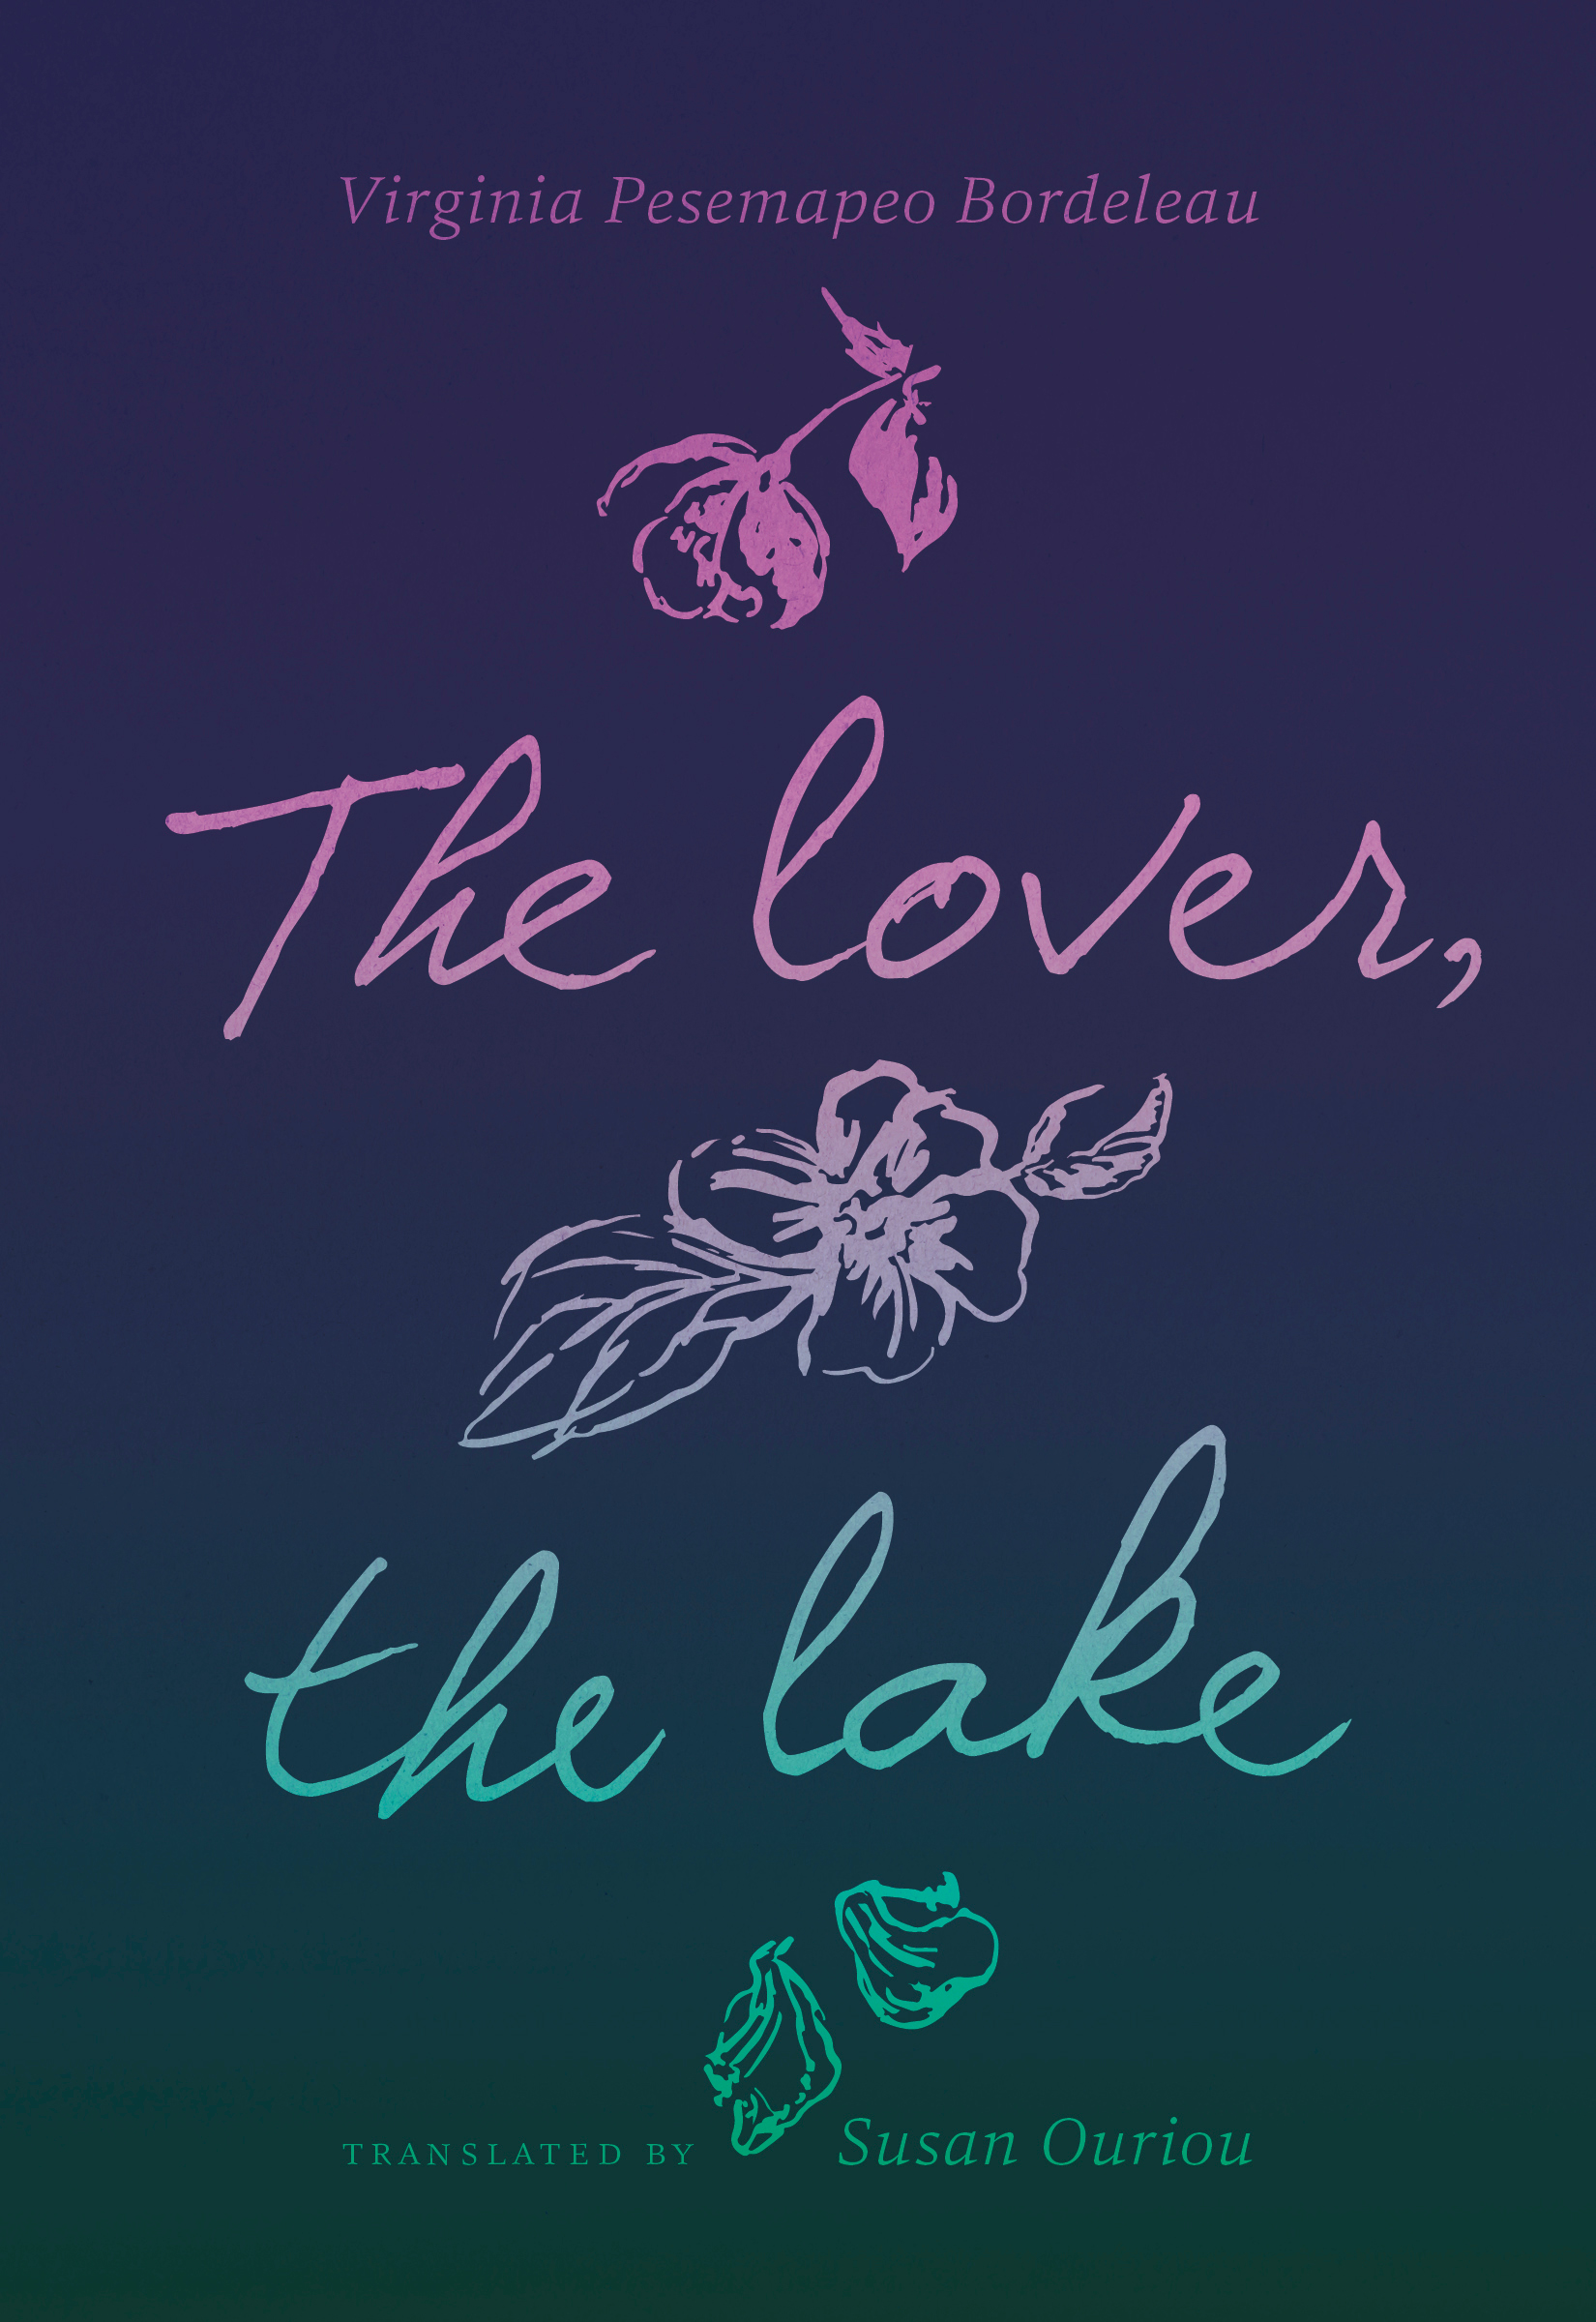 Cover Image of The Lover, the Lake